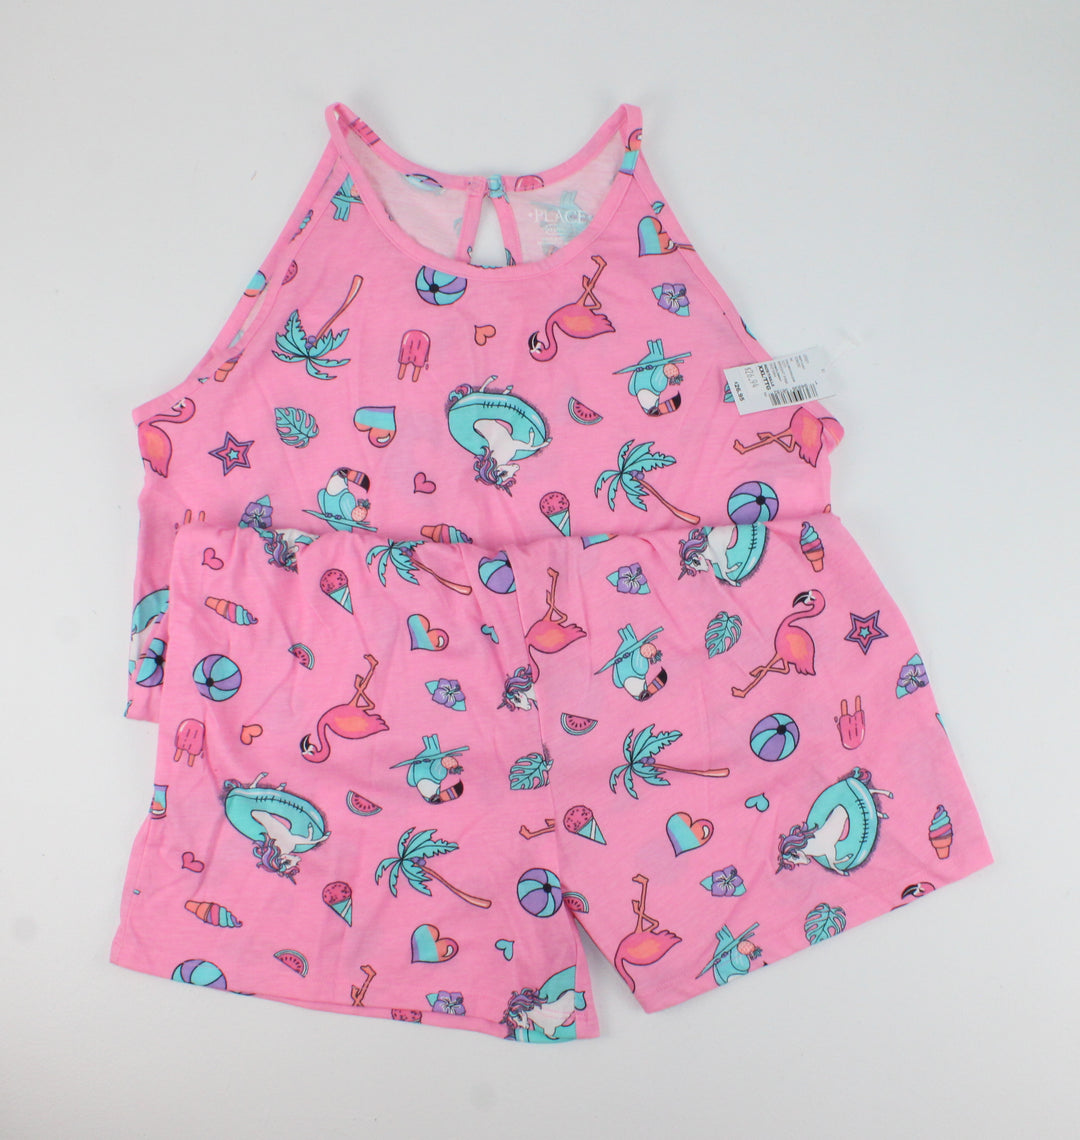 CHILDRENS PLACE SUMMER PINK ROMPER 16Y NEW!